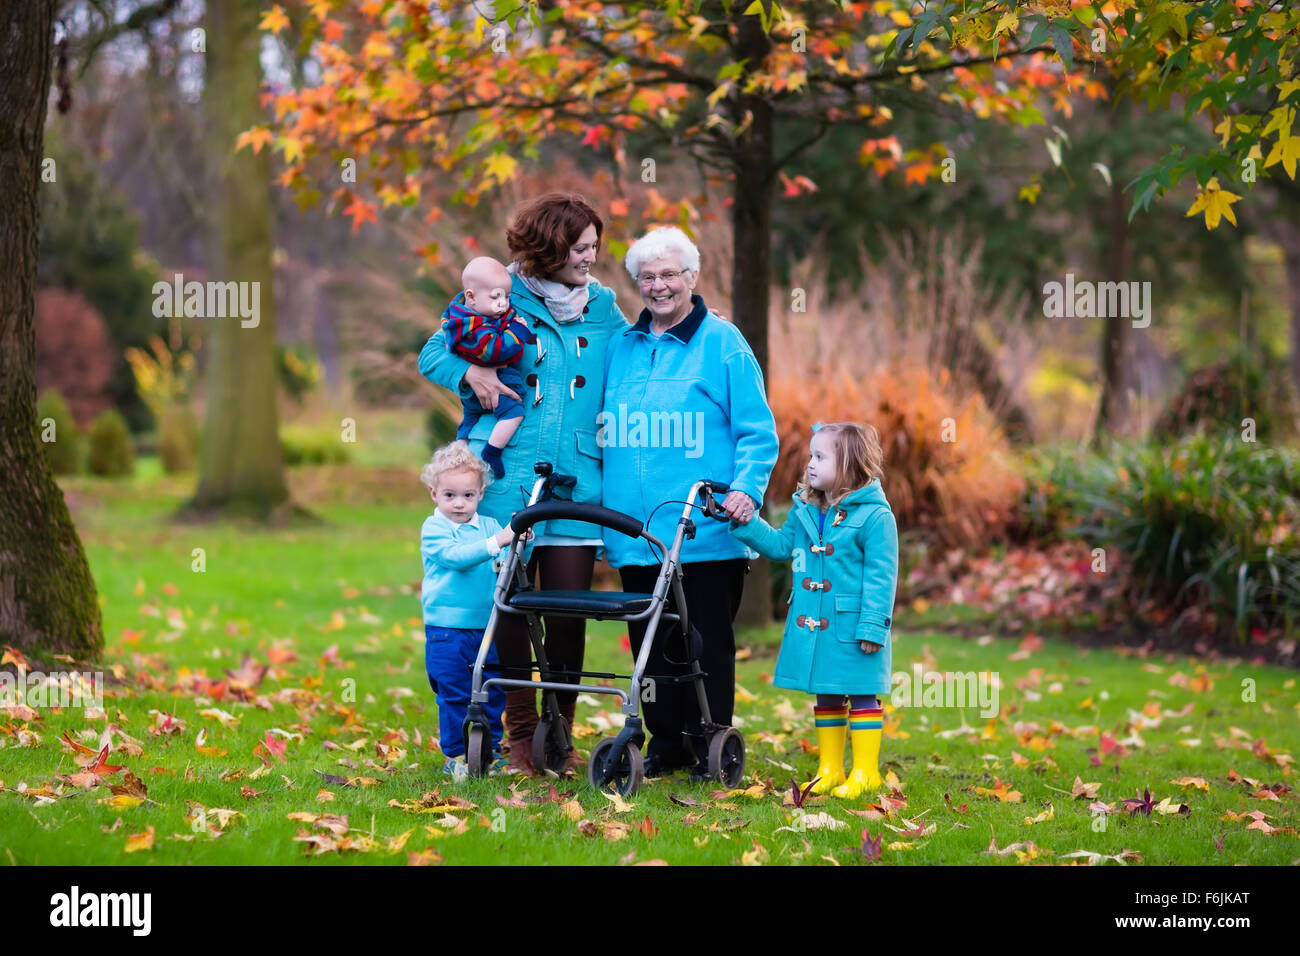 Happy senior lady with a walker or wheel chair and children. Grandmother and kids enjoying a walk in the park. Stock Photo